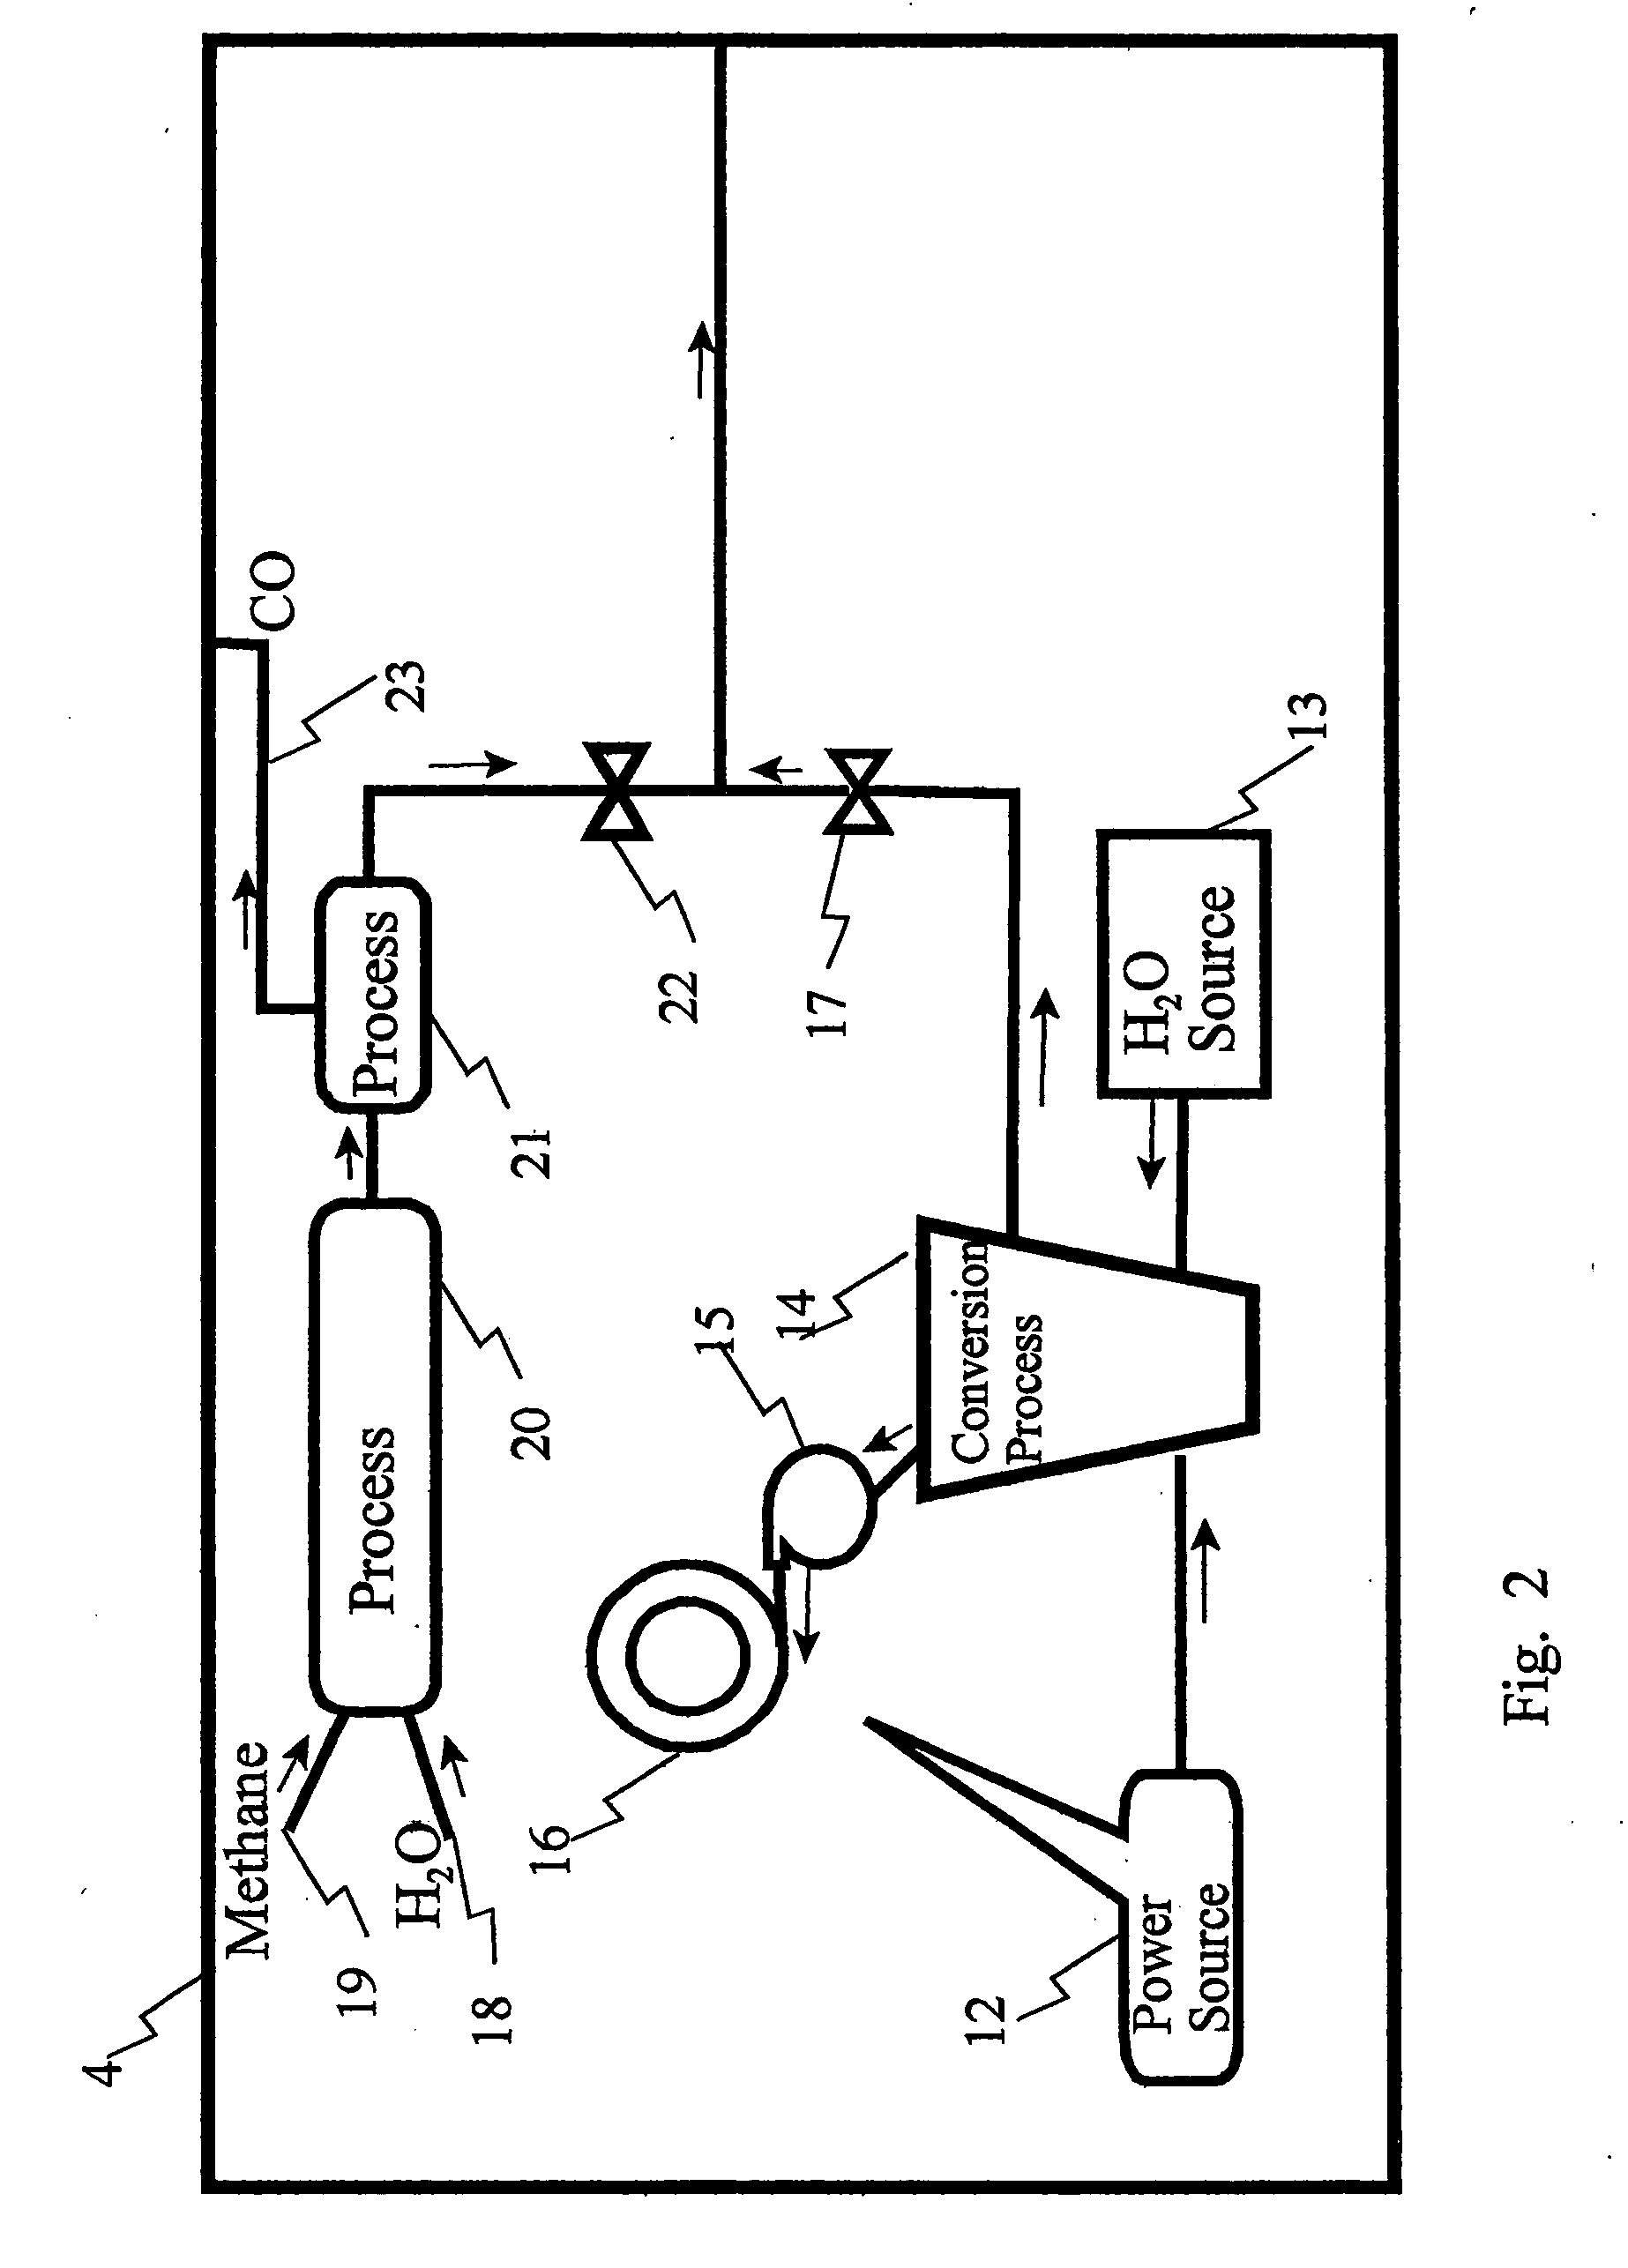 Producing ethanol and saleable organic compounds using an environmental carbon dioxide reduction process